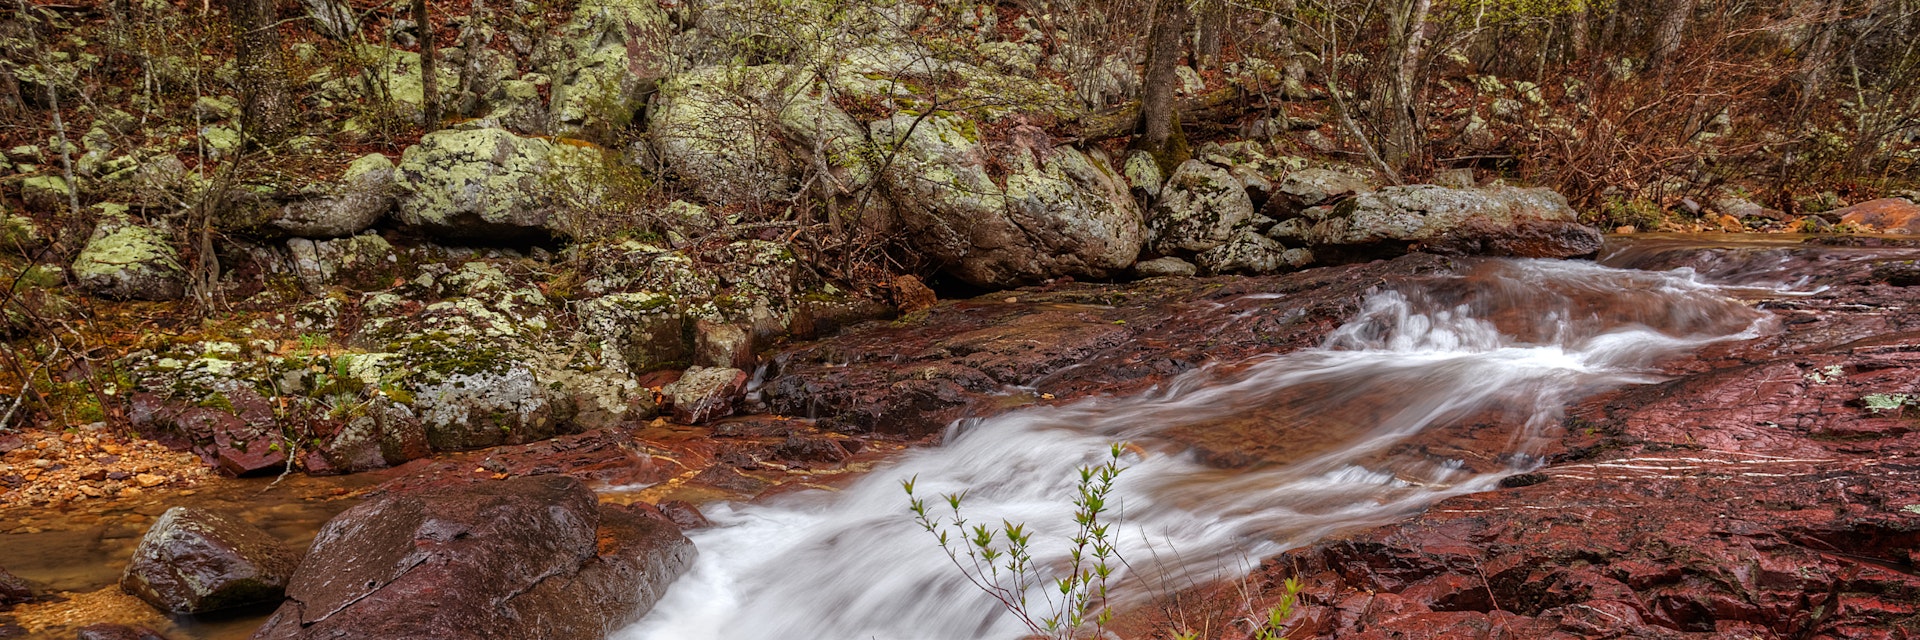 500px Photo ID: 149863135 - Cascade on Shut-ins Creek in Bell Mountain Wilderness in the Mark Twain National Forest in MIssouri